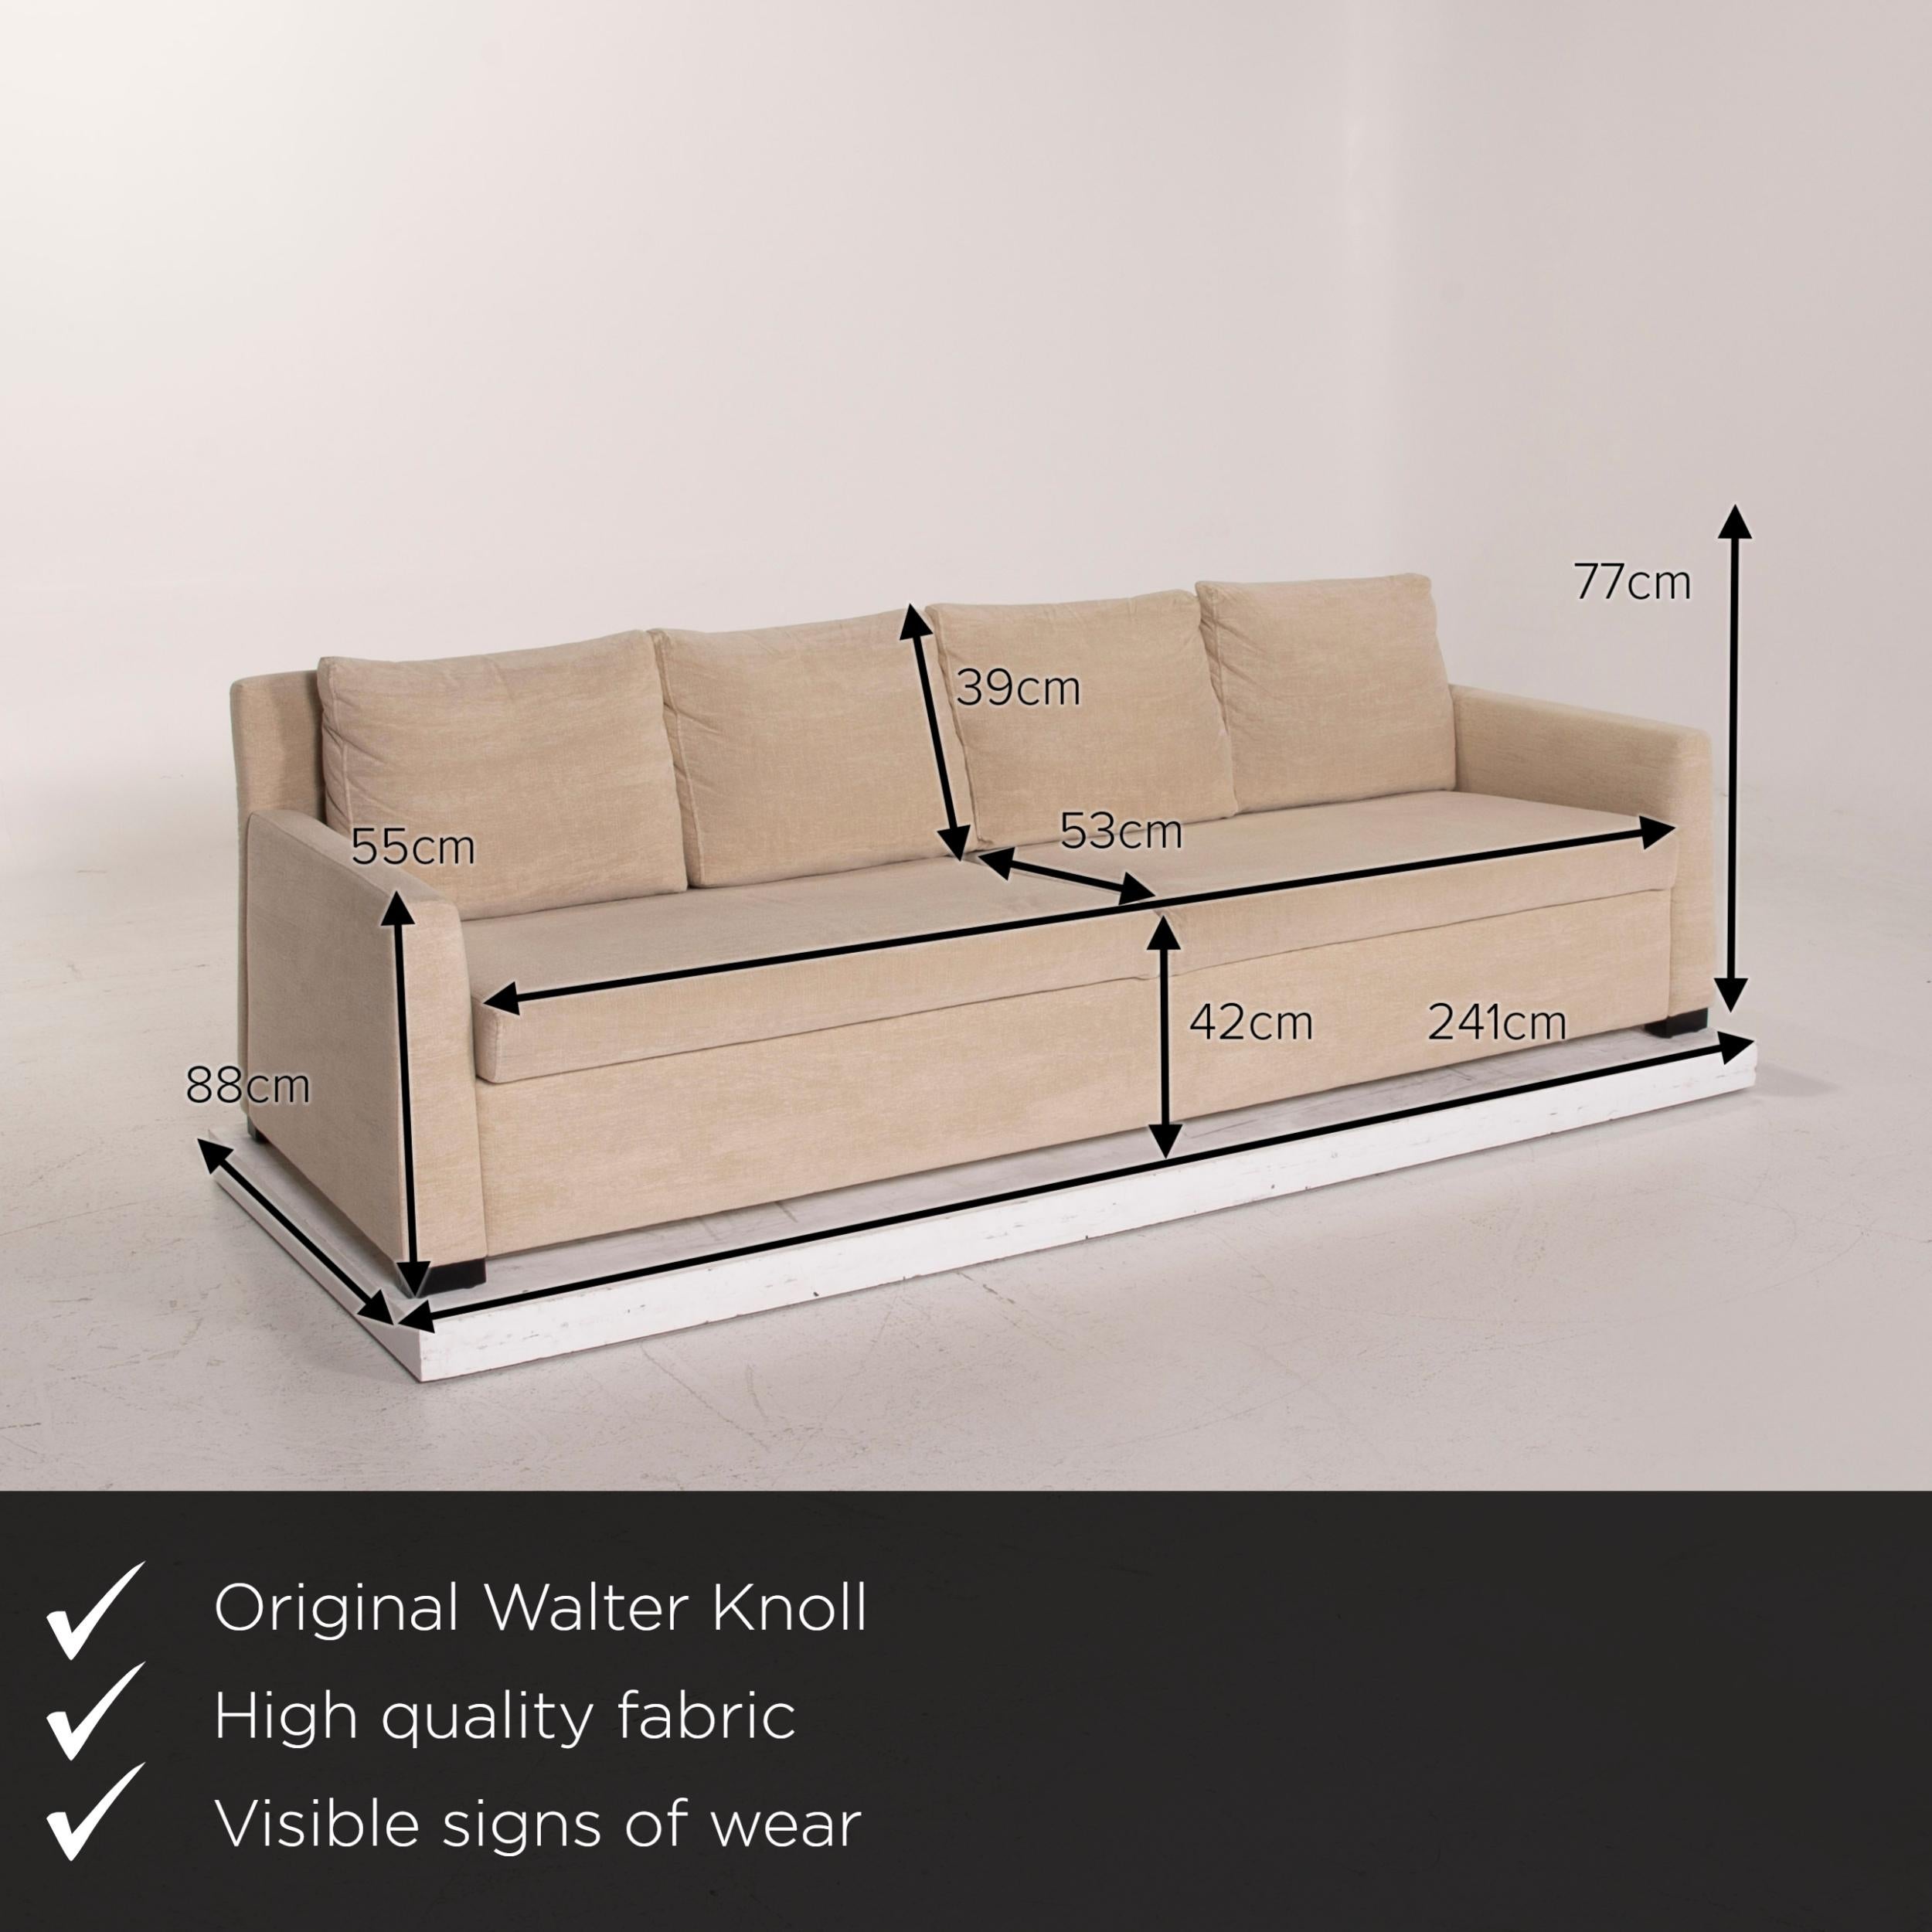 We present to you a Walter Knoll fabric sofa set cream 1 four-seat 1 stool.
 

 Product measurements in centimeters:
 

Depth 88
Width 241
Height 77
Seat height 42
Rest height 55
Seat depth 53
Seat width 220
Back height 39.

 